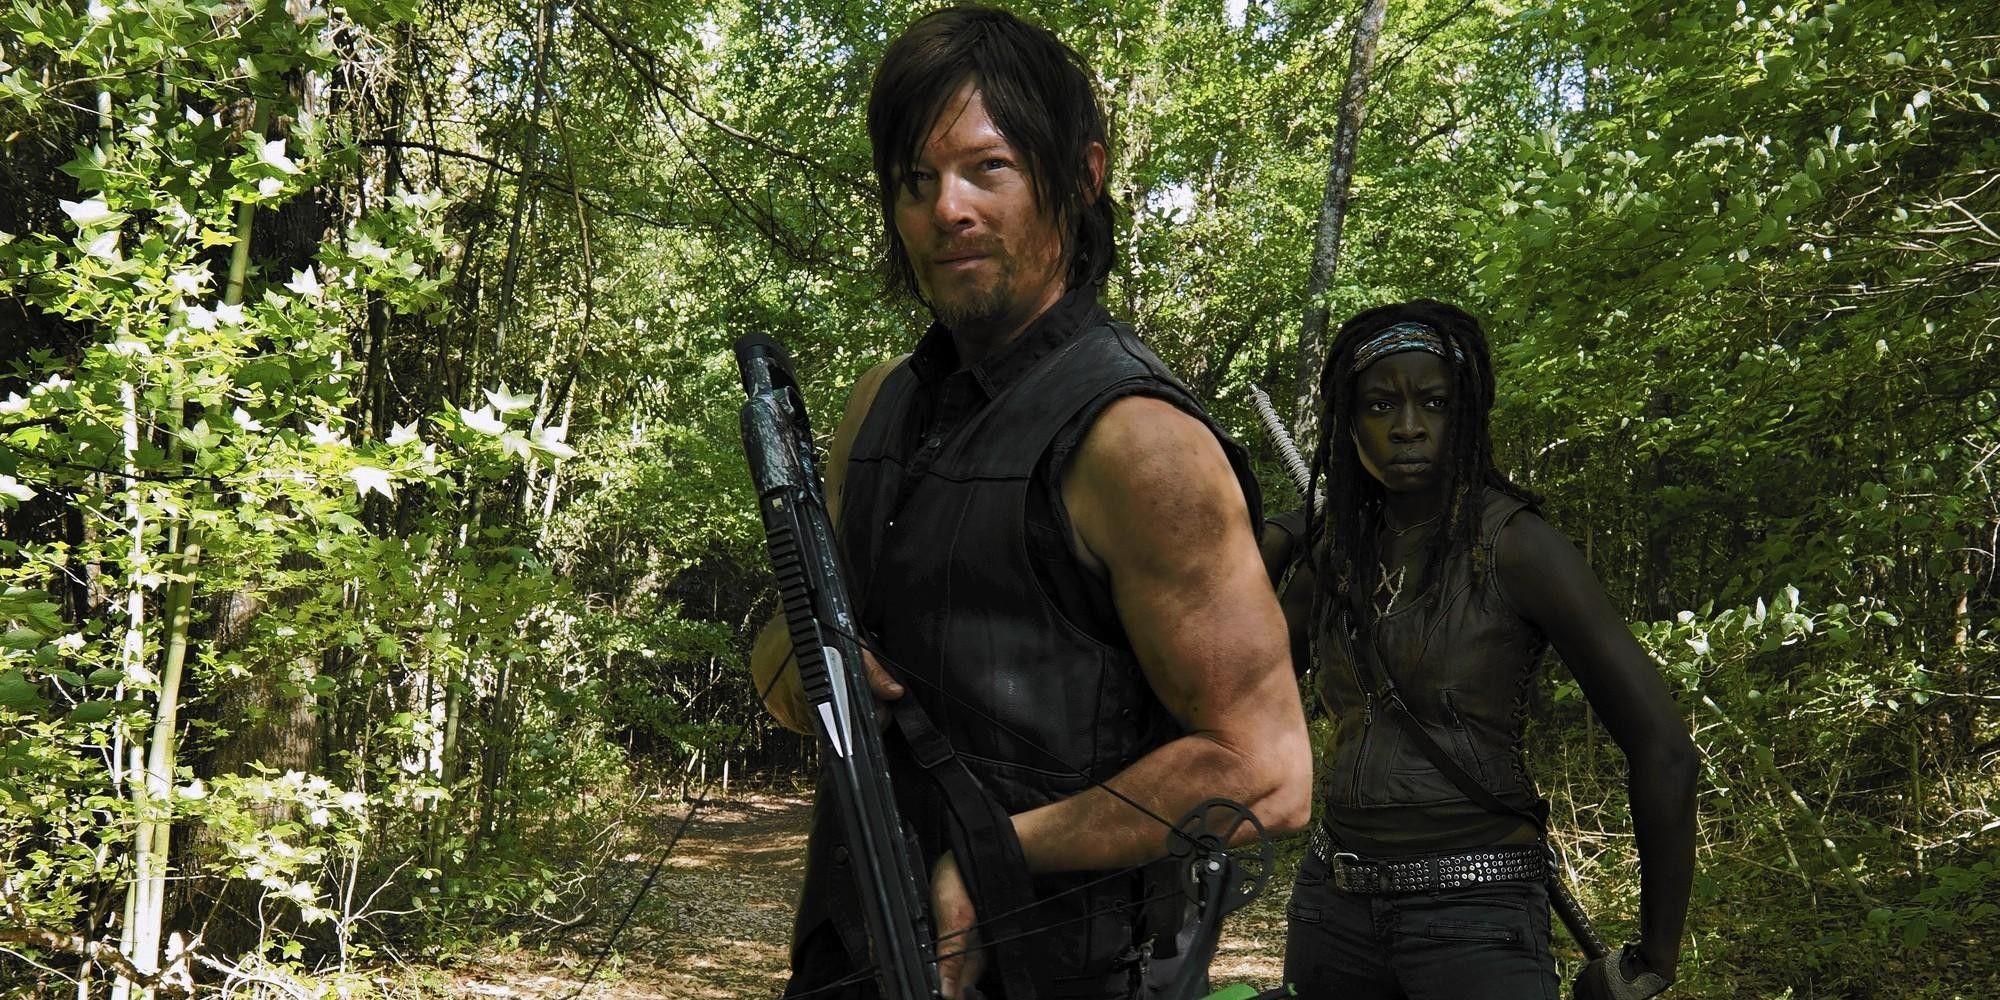 Norman Reedus as Daryl and Danai Gurira as Michonne in The Walking Dead